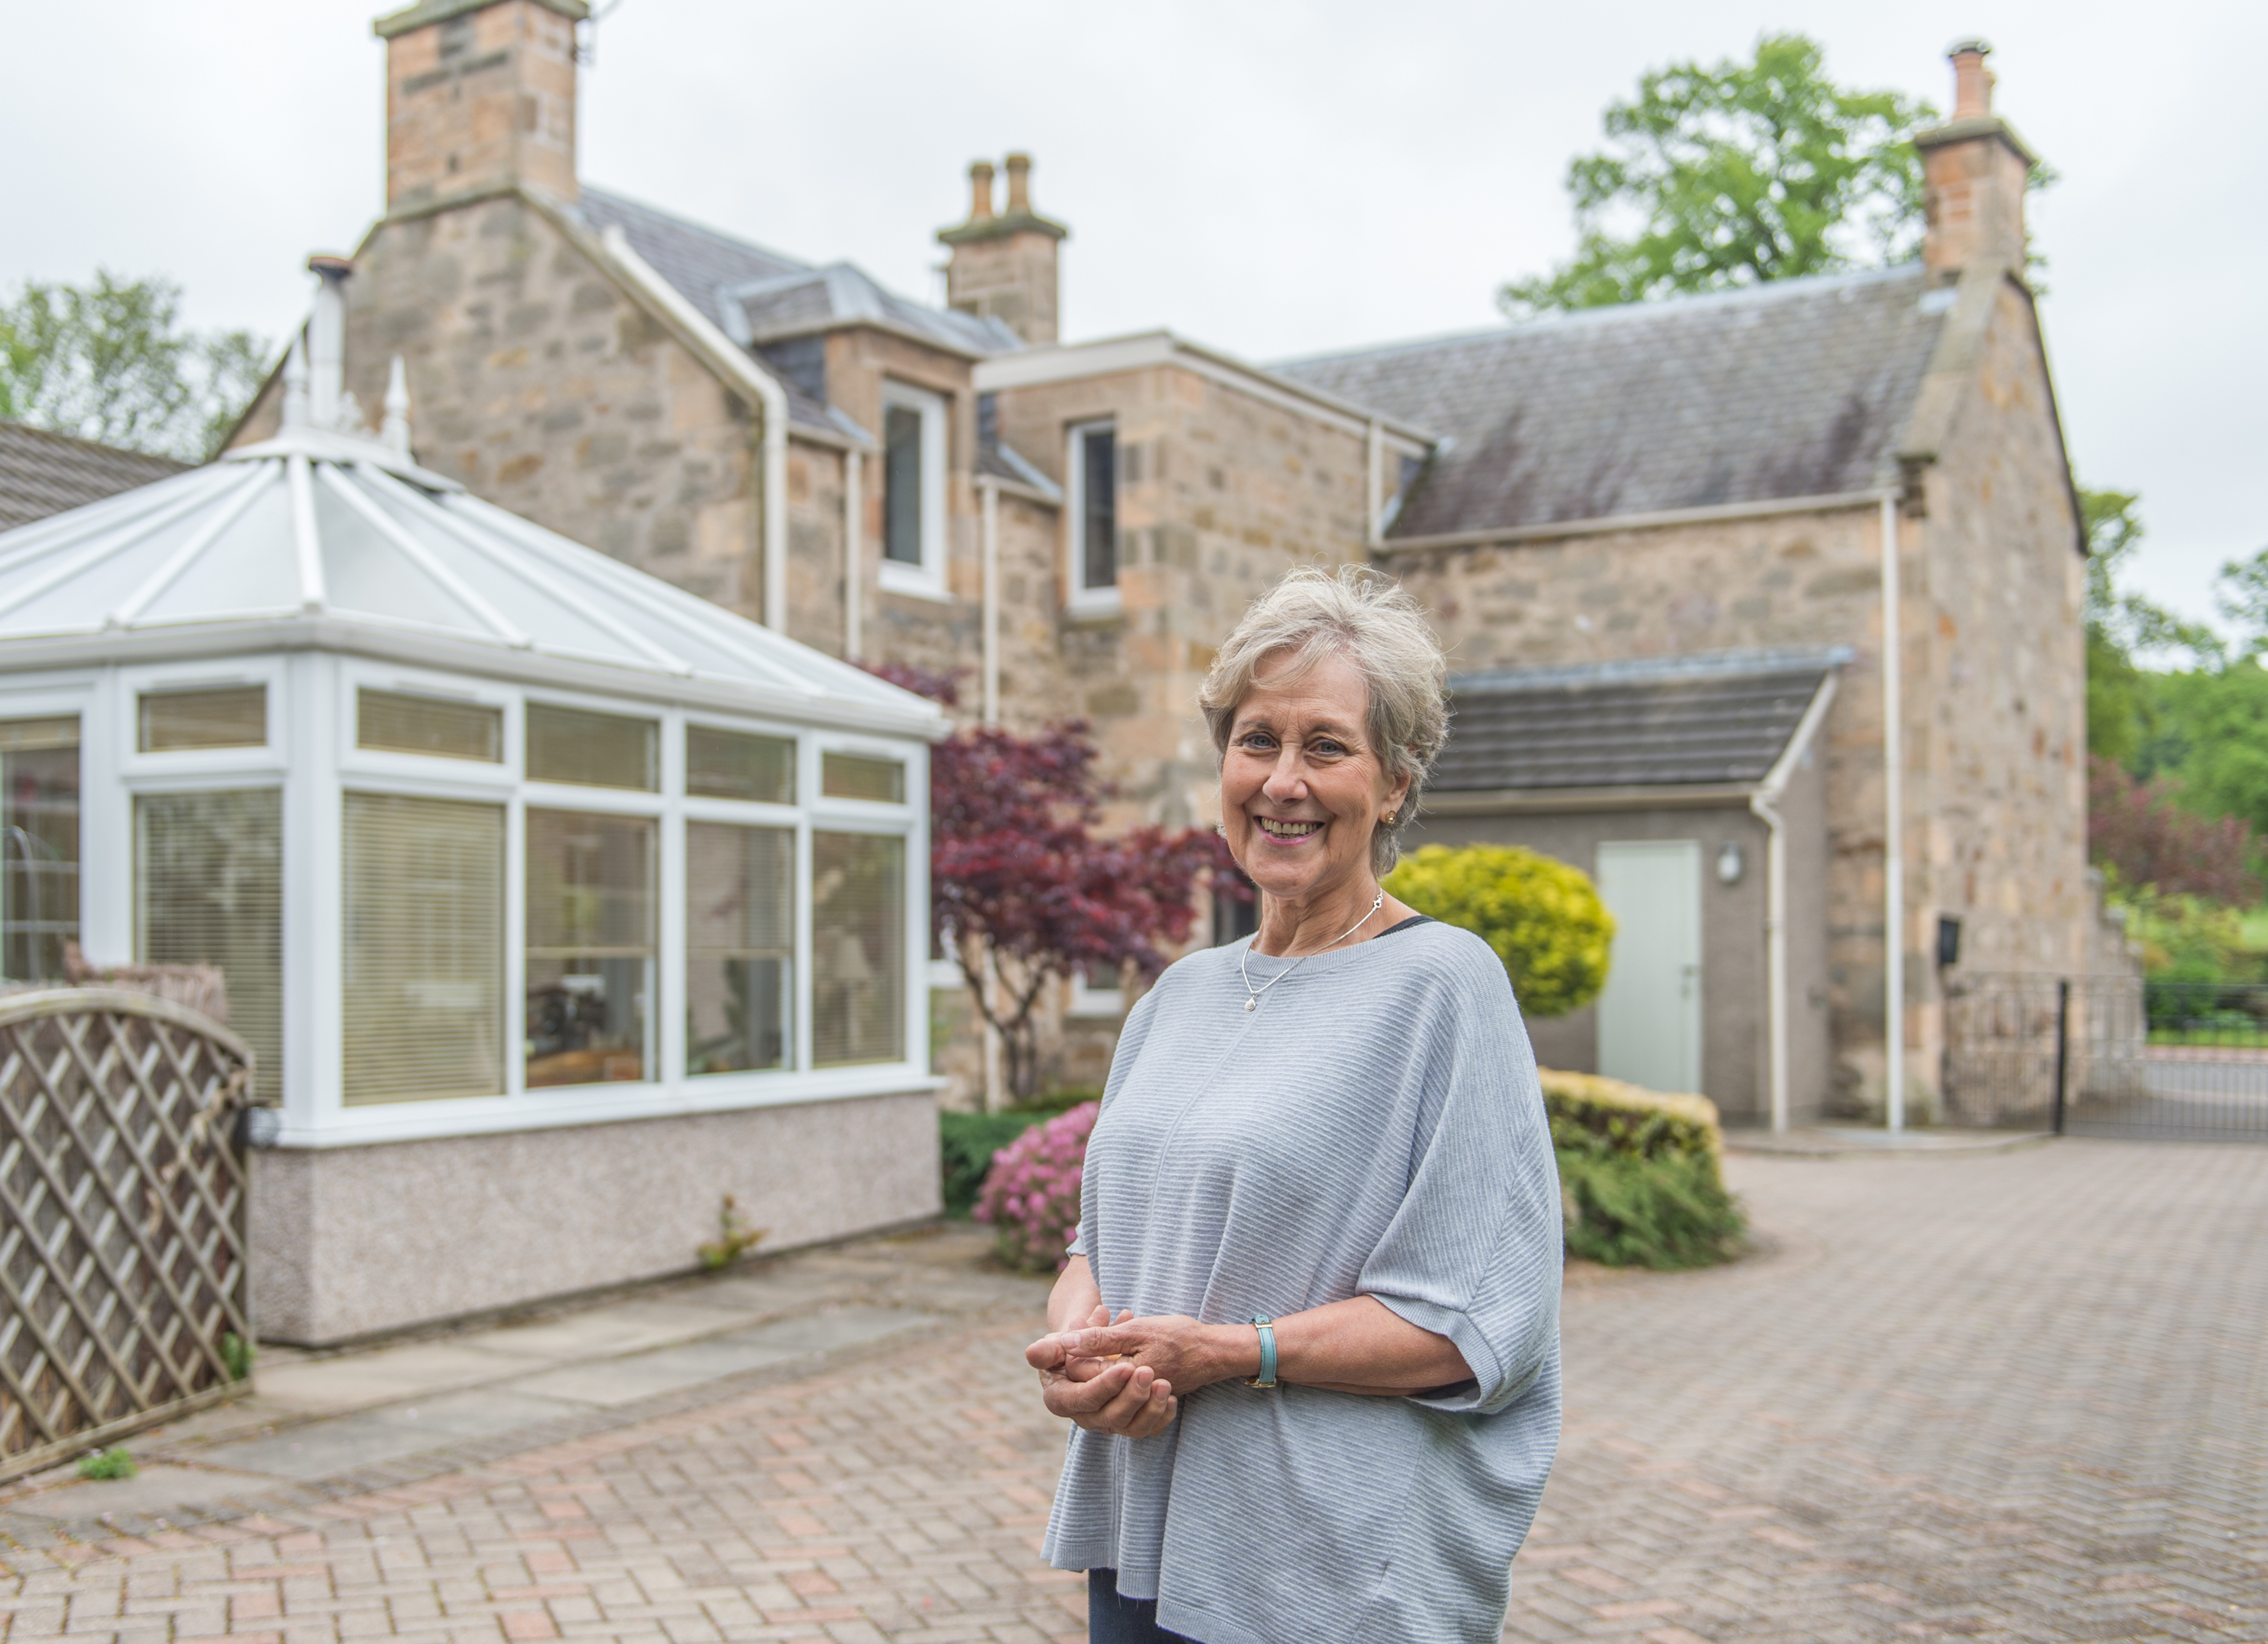 Lindsay Ross has had a family connection to Tormhor in Forres for more than 60 years, but is ready to downsize from her happy home